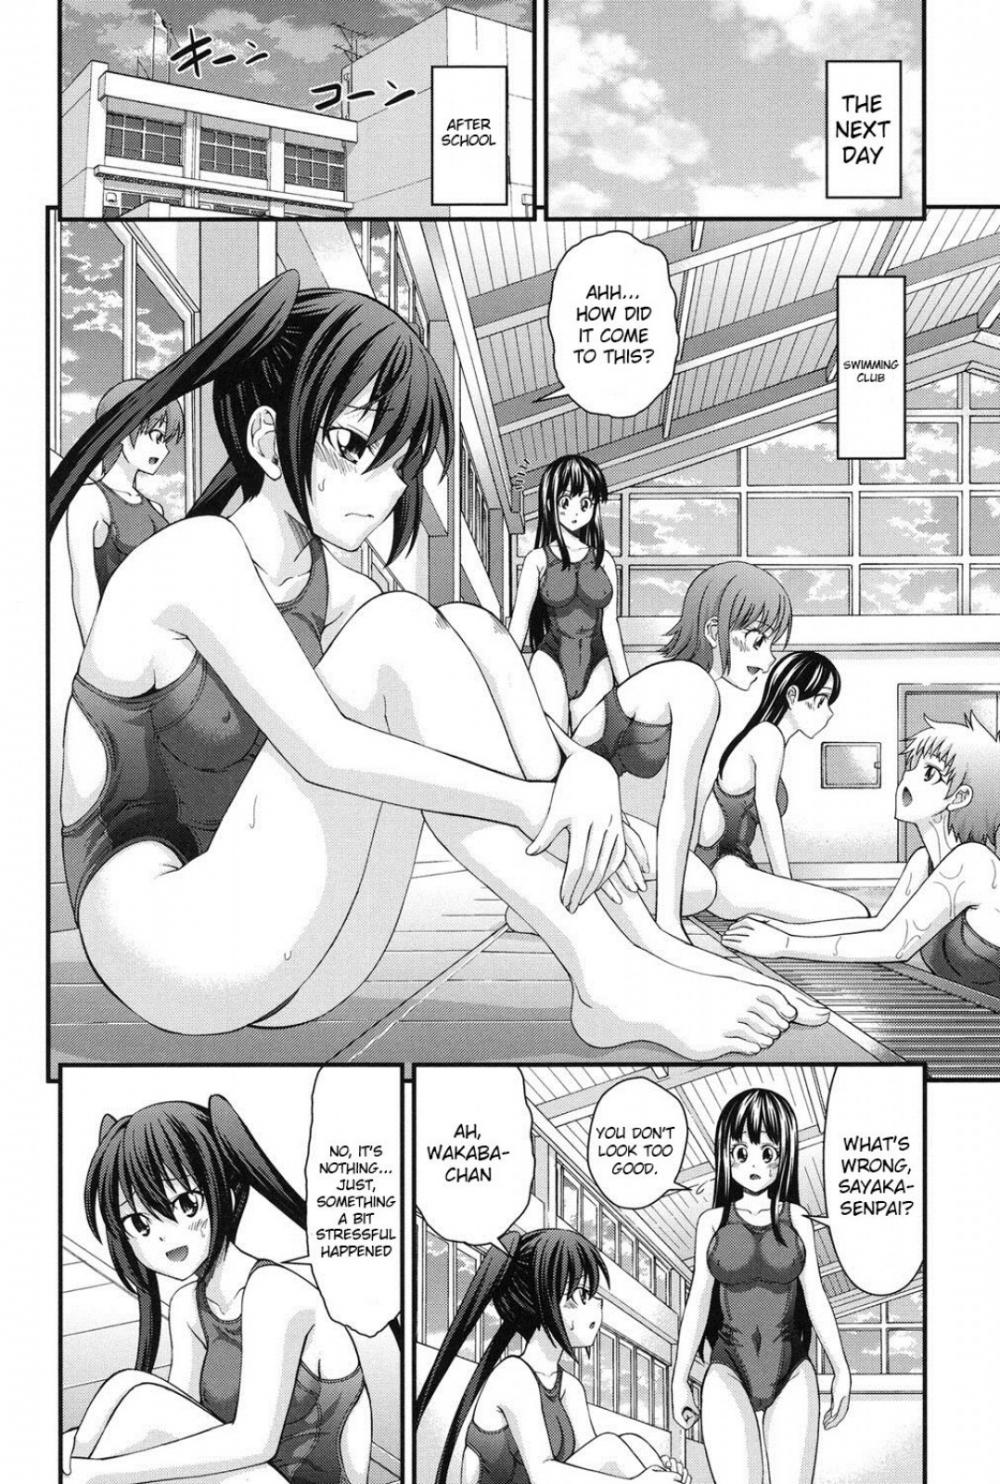 Hentai Manga Comic-Ani to Replace - Replace and Brother-Chapter 2-2